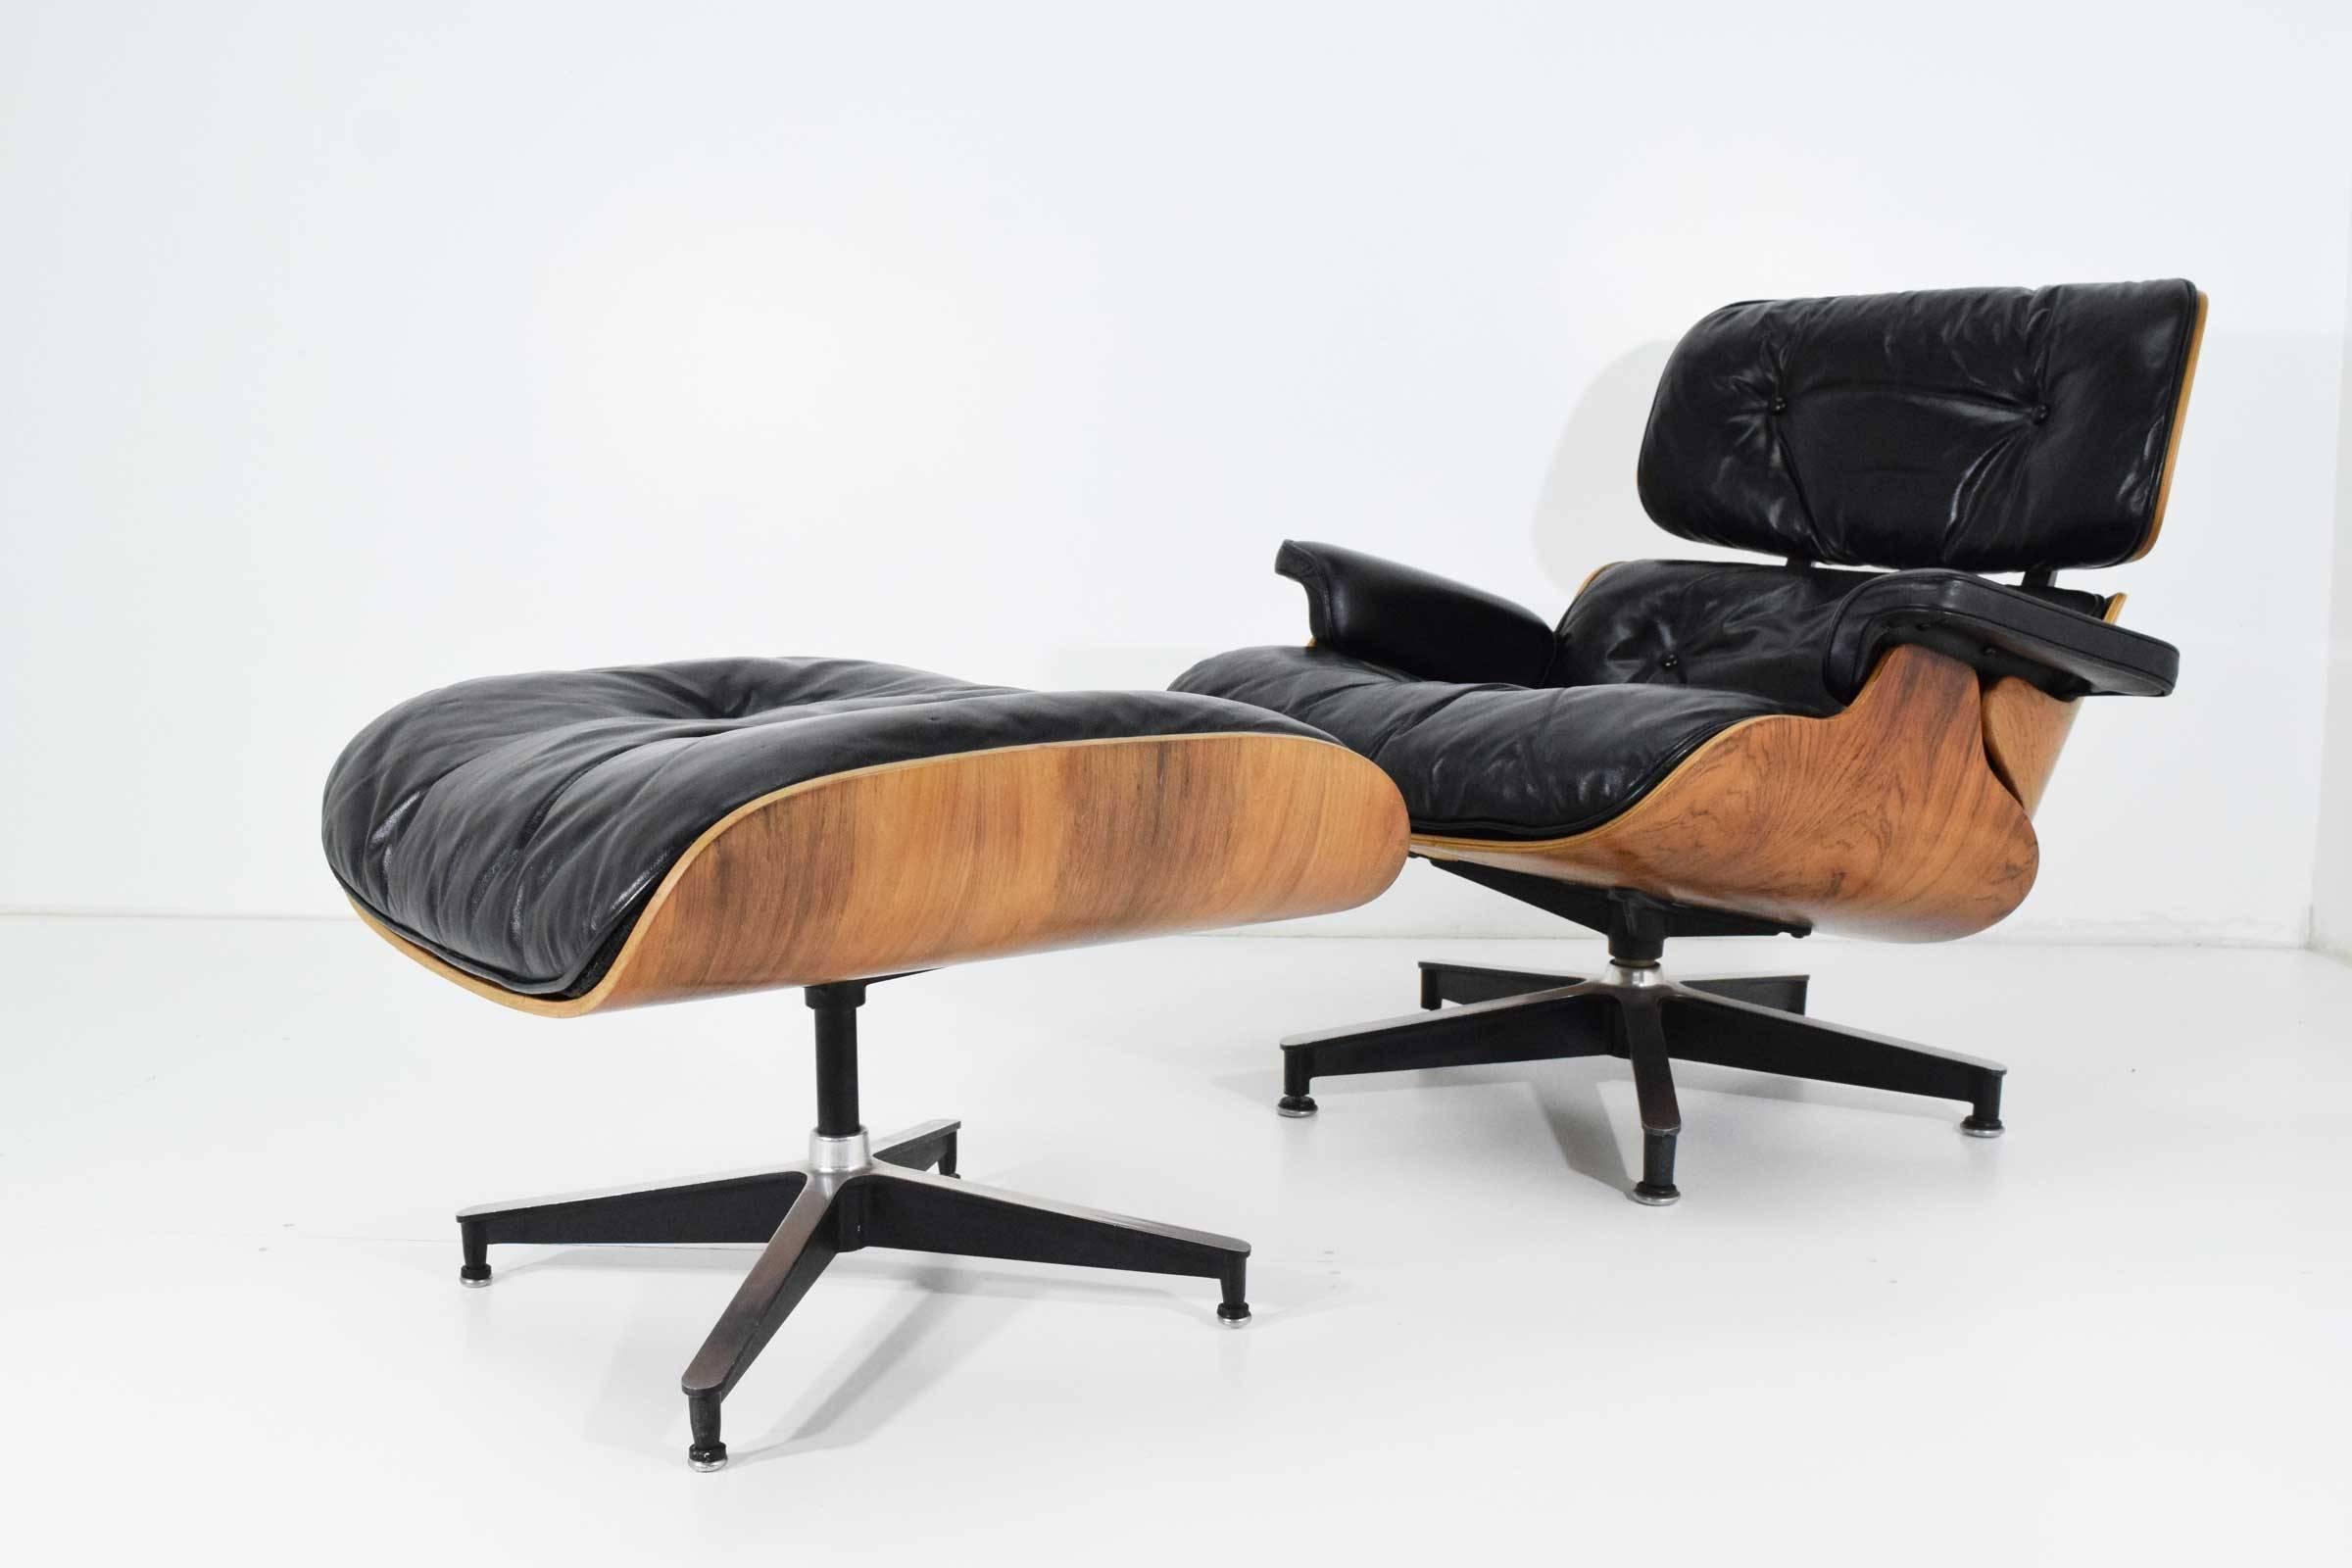 Charles and Ray Eames lounge chair with ottoman by Herman Miller, early 1960s production.
The chair is down filled, has the round metal clips used before 1971, 5 layers of plywood, tags indicate Los Angeles, Calif.
The rosewood has a beautiful